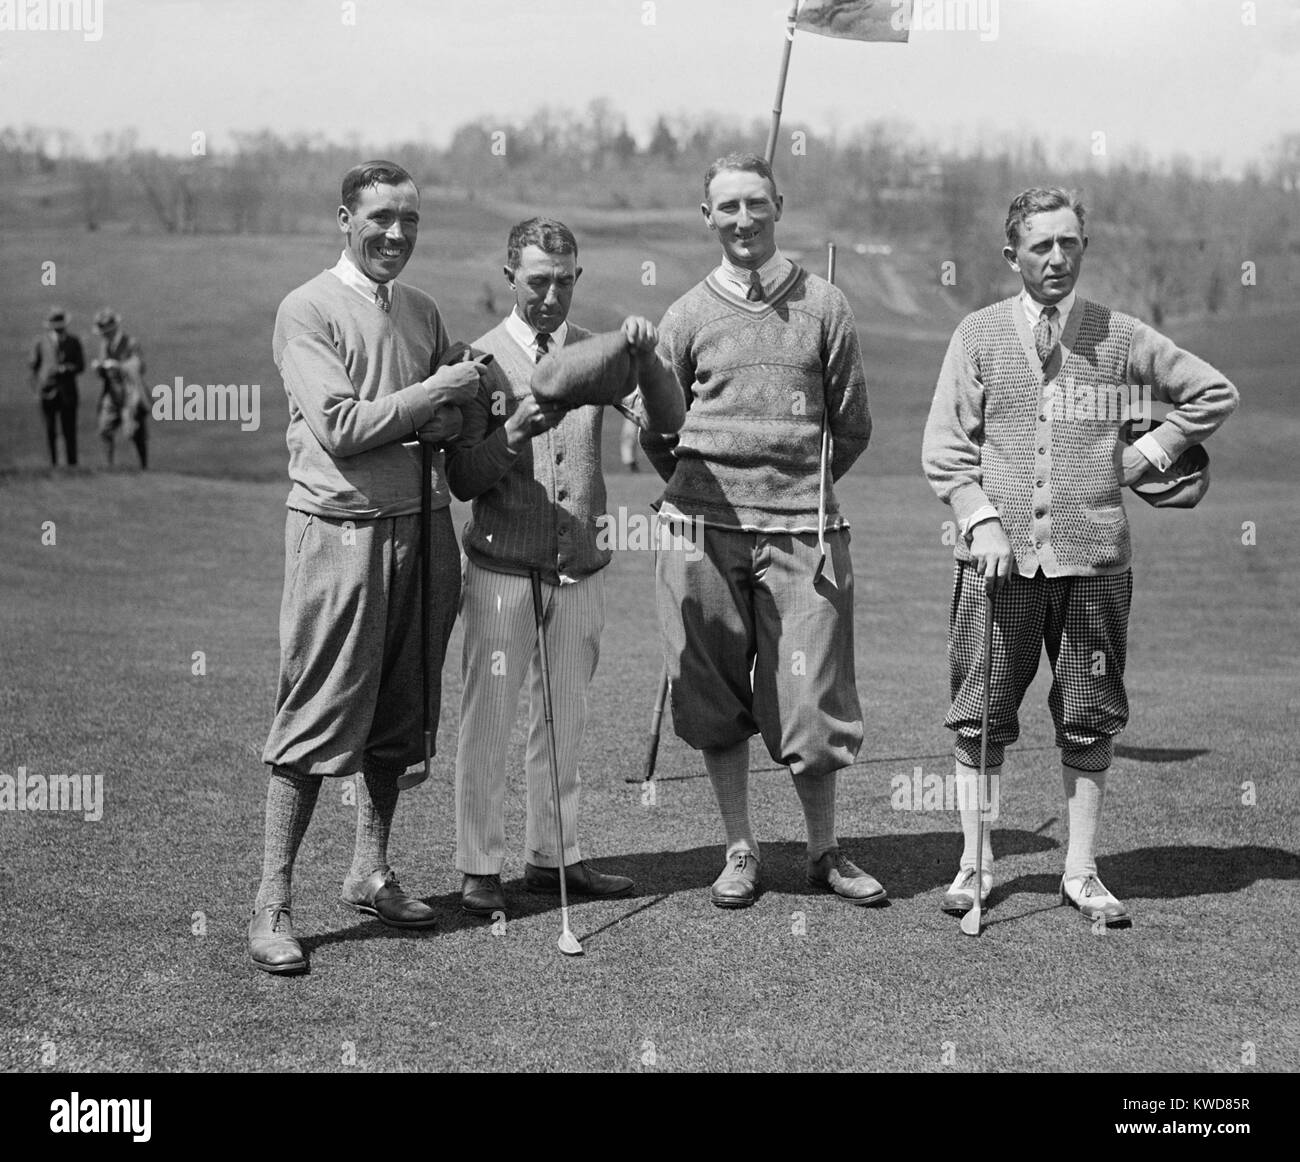 Golfers J.W. Ockenden, Fred McLeod, Arthur S. Havers, Jock Hutchison, April 22, 1924. McLeod and Hutchison were professional players and later inducted into the PGA Hall of Fame. Washington, D.C. vicinity (BSLOC 2015 17 110) Stock Photo